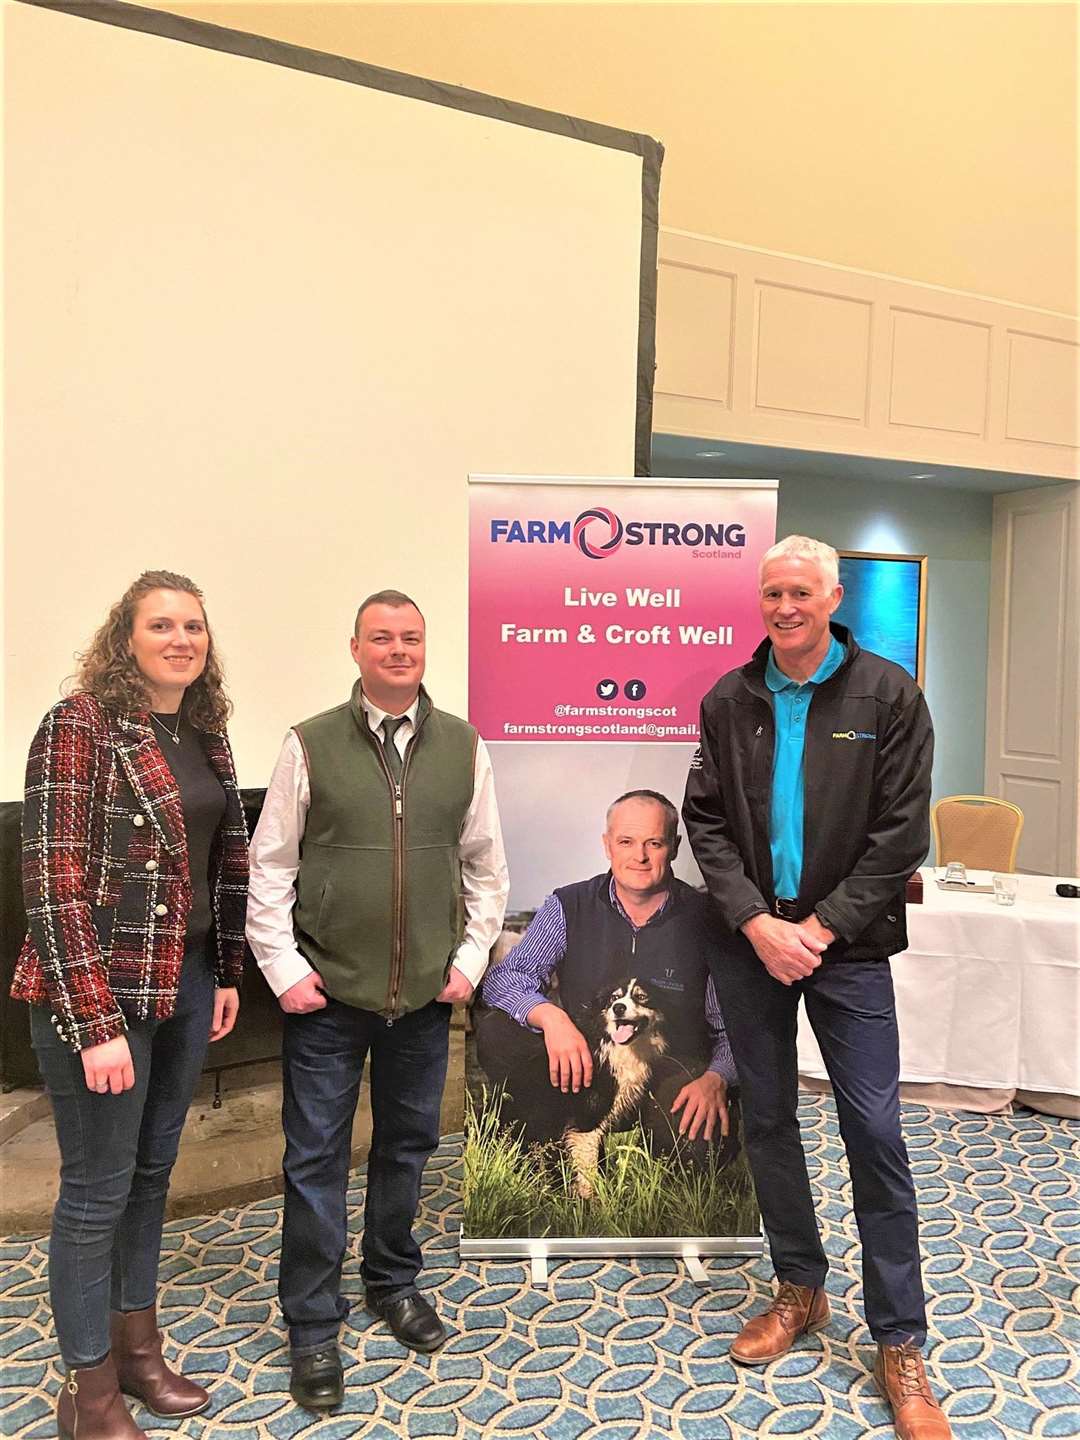 Rebecca Dawes, Farmstrong Scotland, and Alexander Pirie, of SAC Consulting who have supported two of the events on the tour (Ayr and Caithness), along with Marc Gascoigne (right).